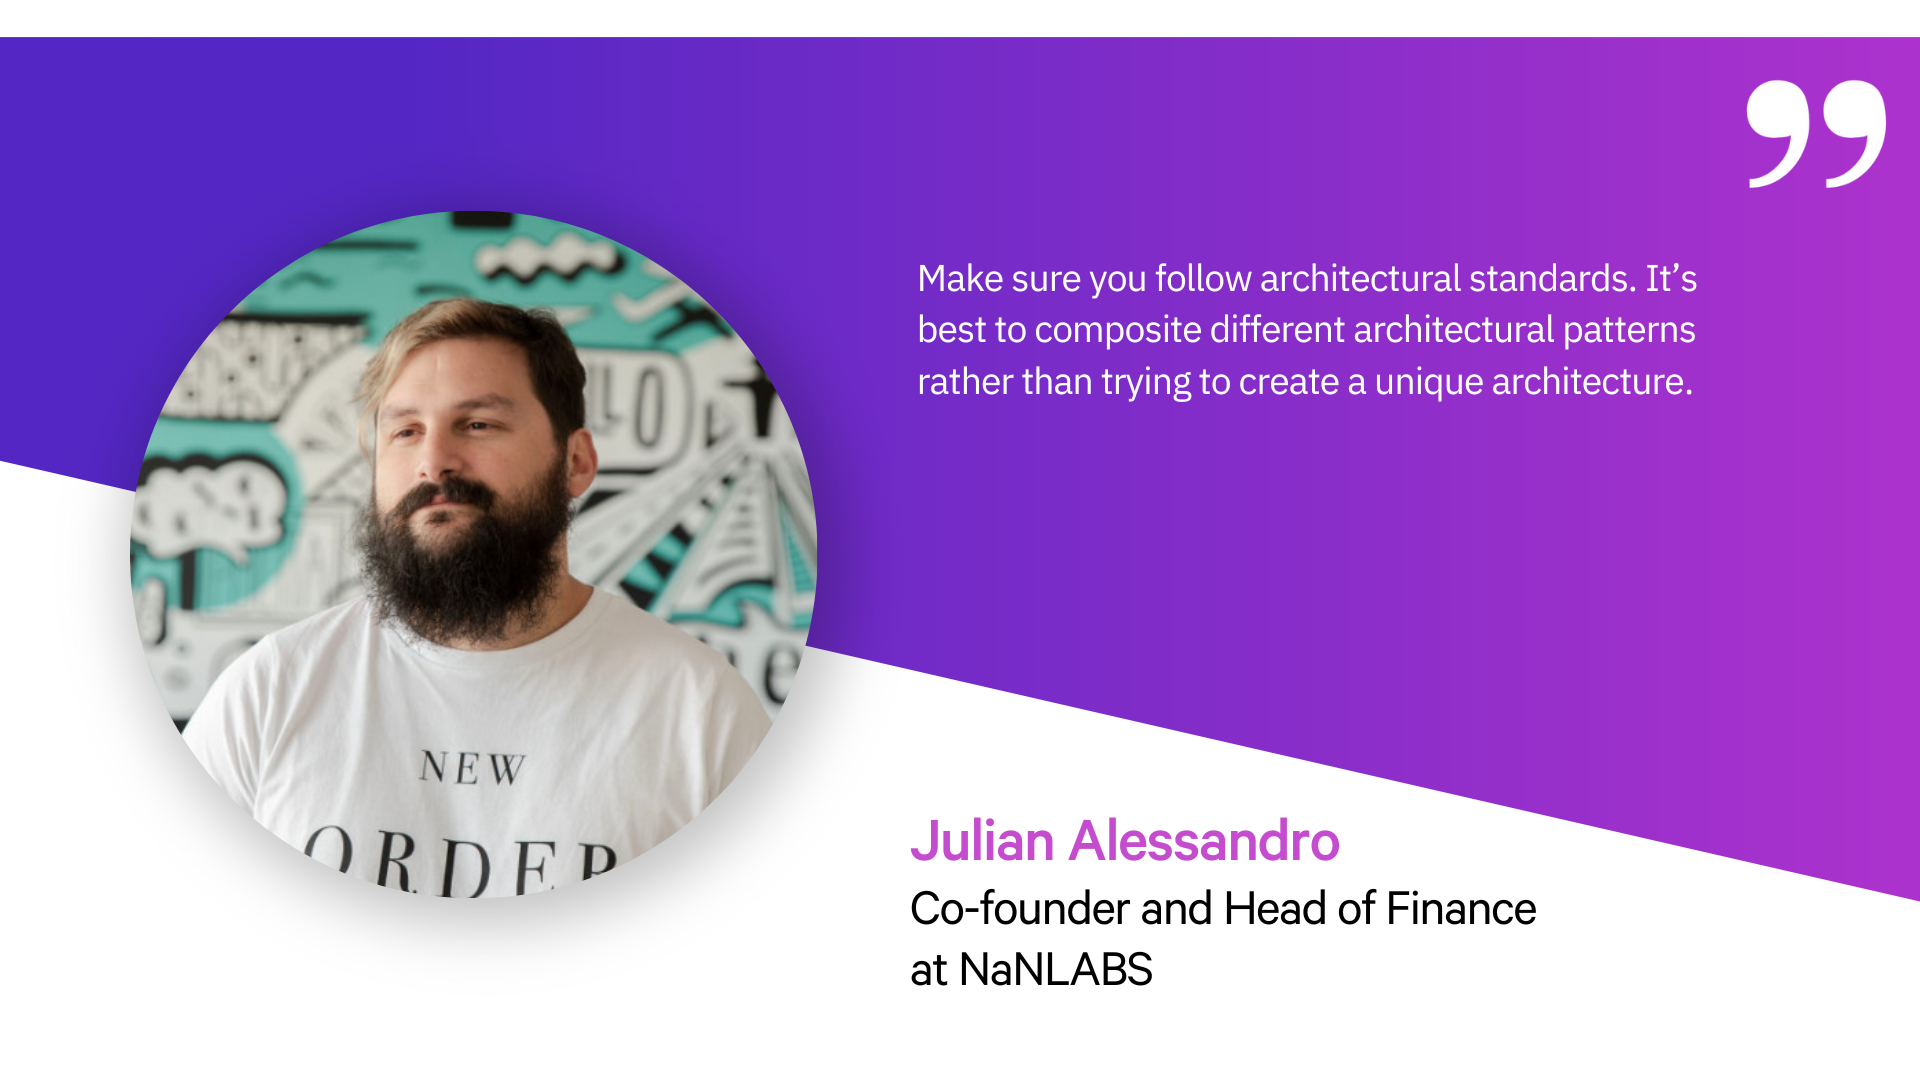 A quote about following architectural standards from Julian Alessandro, Co-Founder and Head of Finance at NaNLABS.